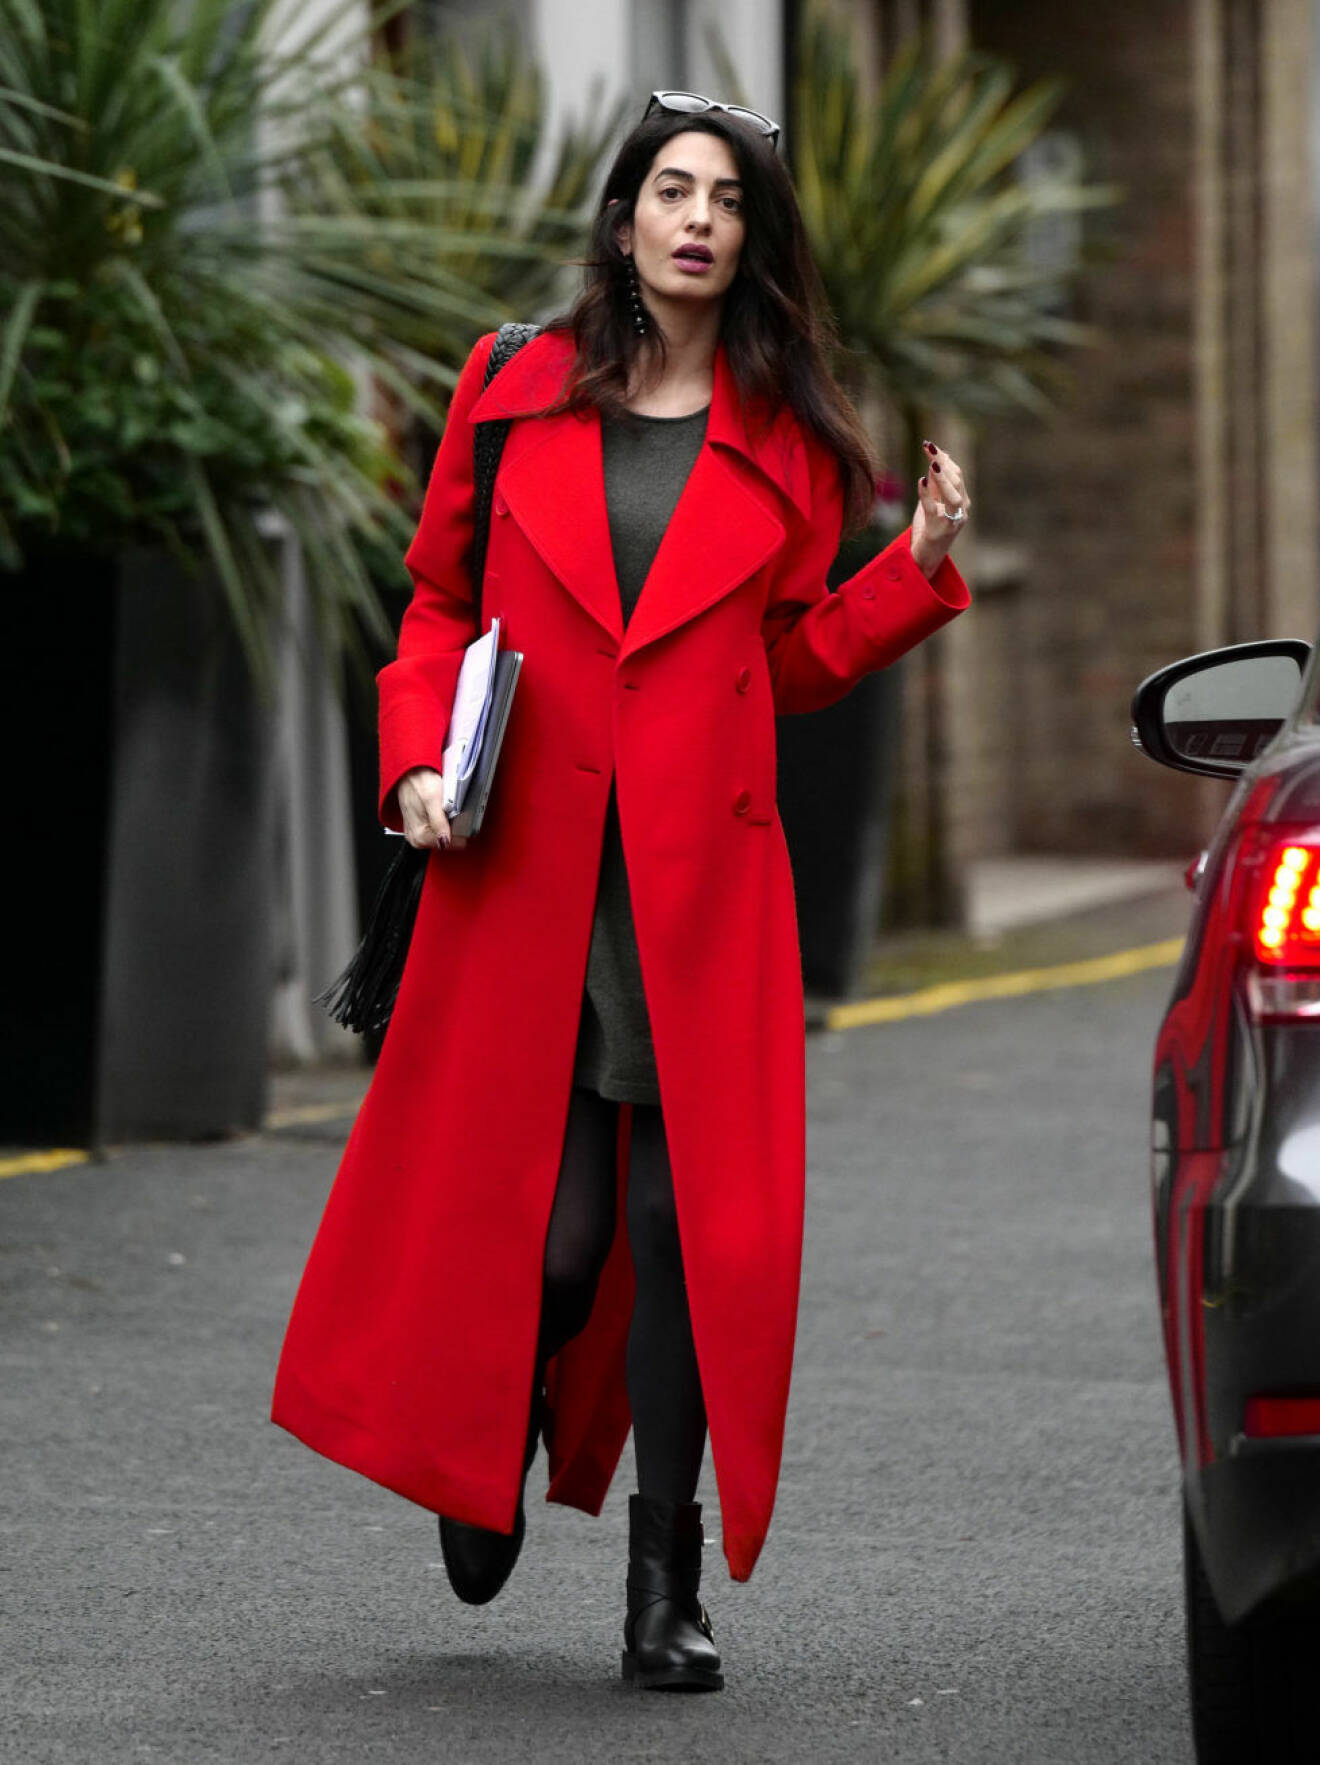 EXCLUSIVE: **PREMIUM EXCLUSIVE RATES APPLY**MUST AGREE FEES** Amal Clooney is seen looking radiant whilst out and about in London. The human rights lawyer looked amazing in a long red wool coat with her pregnant bump on show. Clooney and husband George recently announced that they are expecting twins. Pictured: Amal Clooney Ref: SPL1447636 210217 EXCLUSIVE Picture by: W8 Media / Splash News Splash News and Pictures Los Angeles:310-821-2666 New York: 212-619-2666 London: 870-934-2666 photodesk@splashnews.com IBL